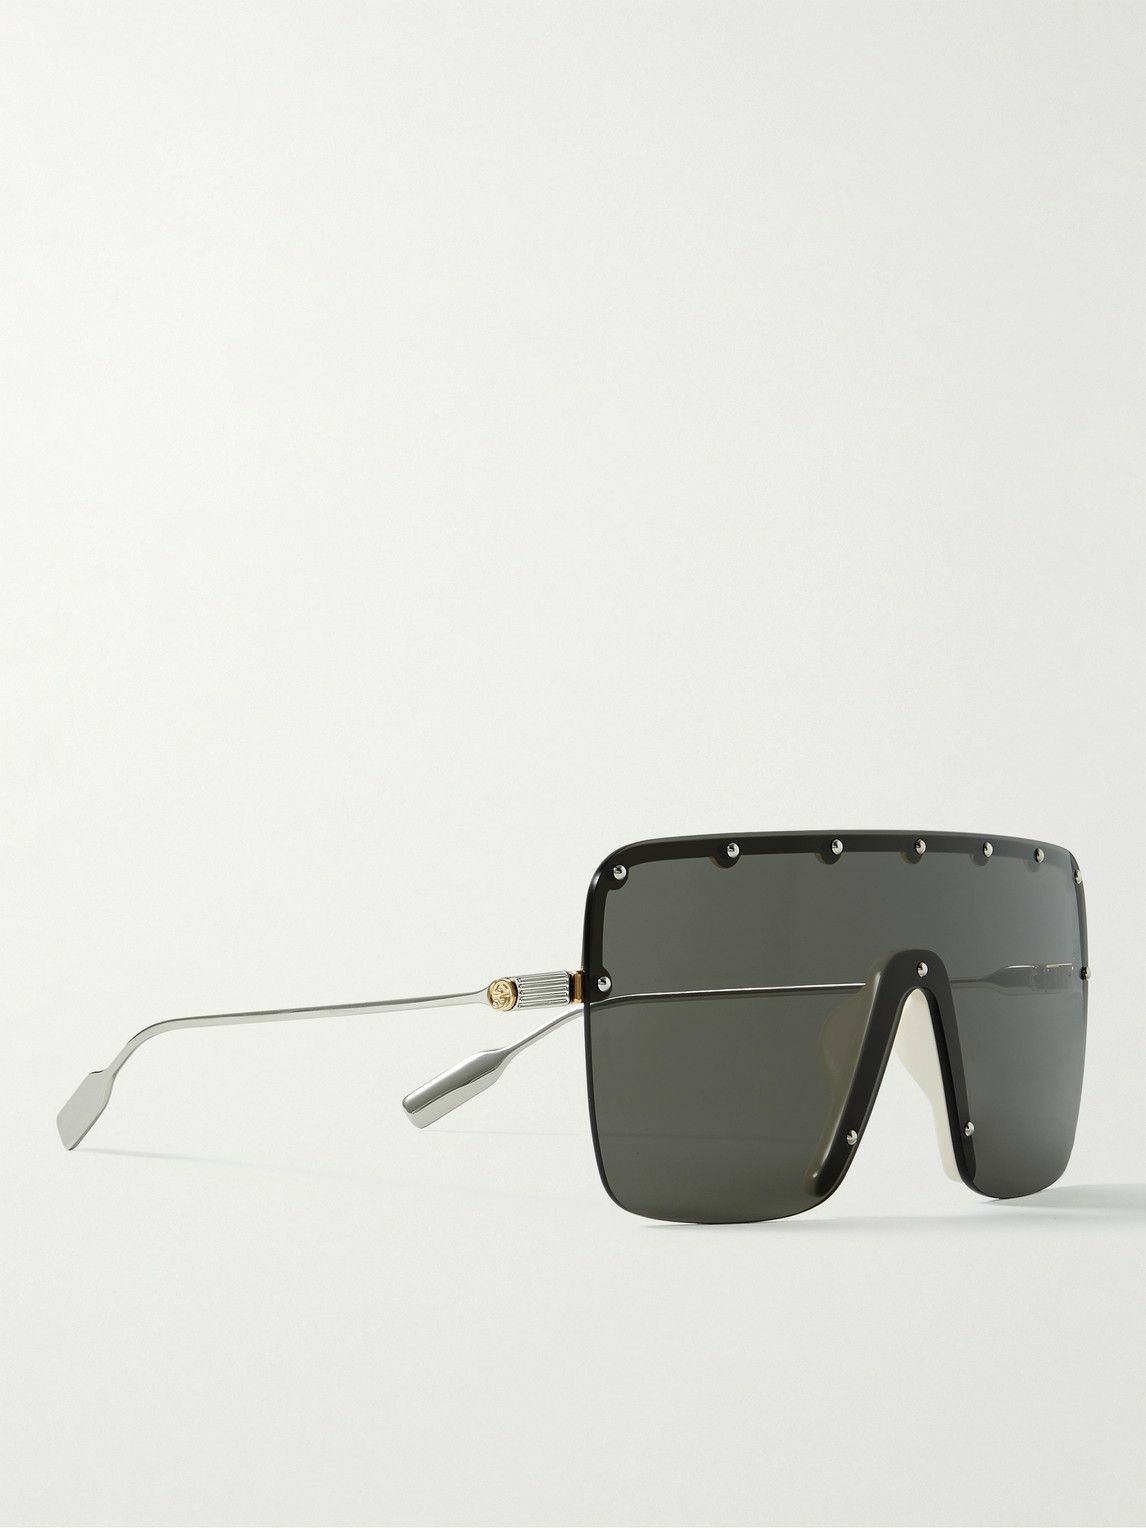 Gucci Square Sunglasses With Contrast Arms in Green for Men